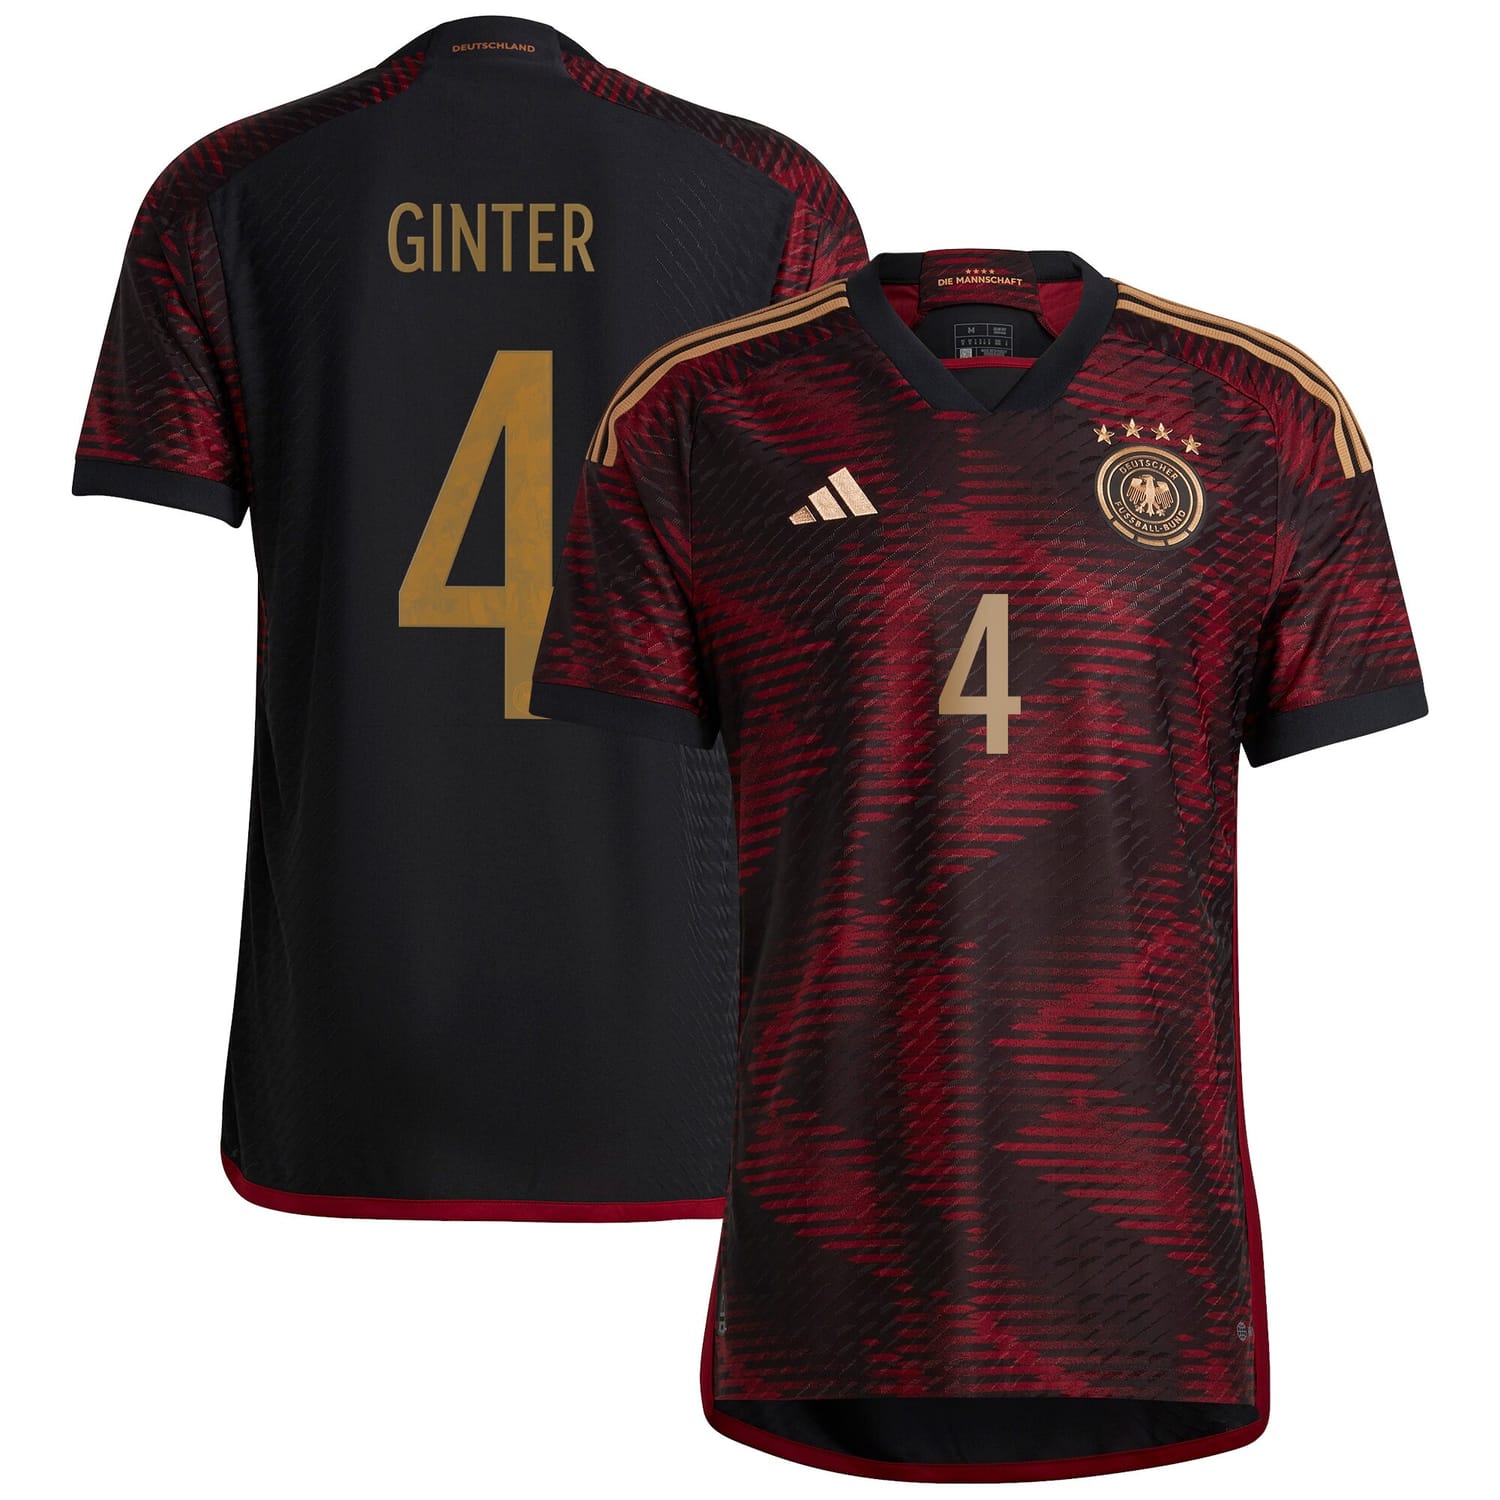 Germany National Team Away Authentic Jersey Shirt player Matthias Ginter 4 printing for Men